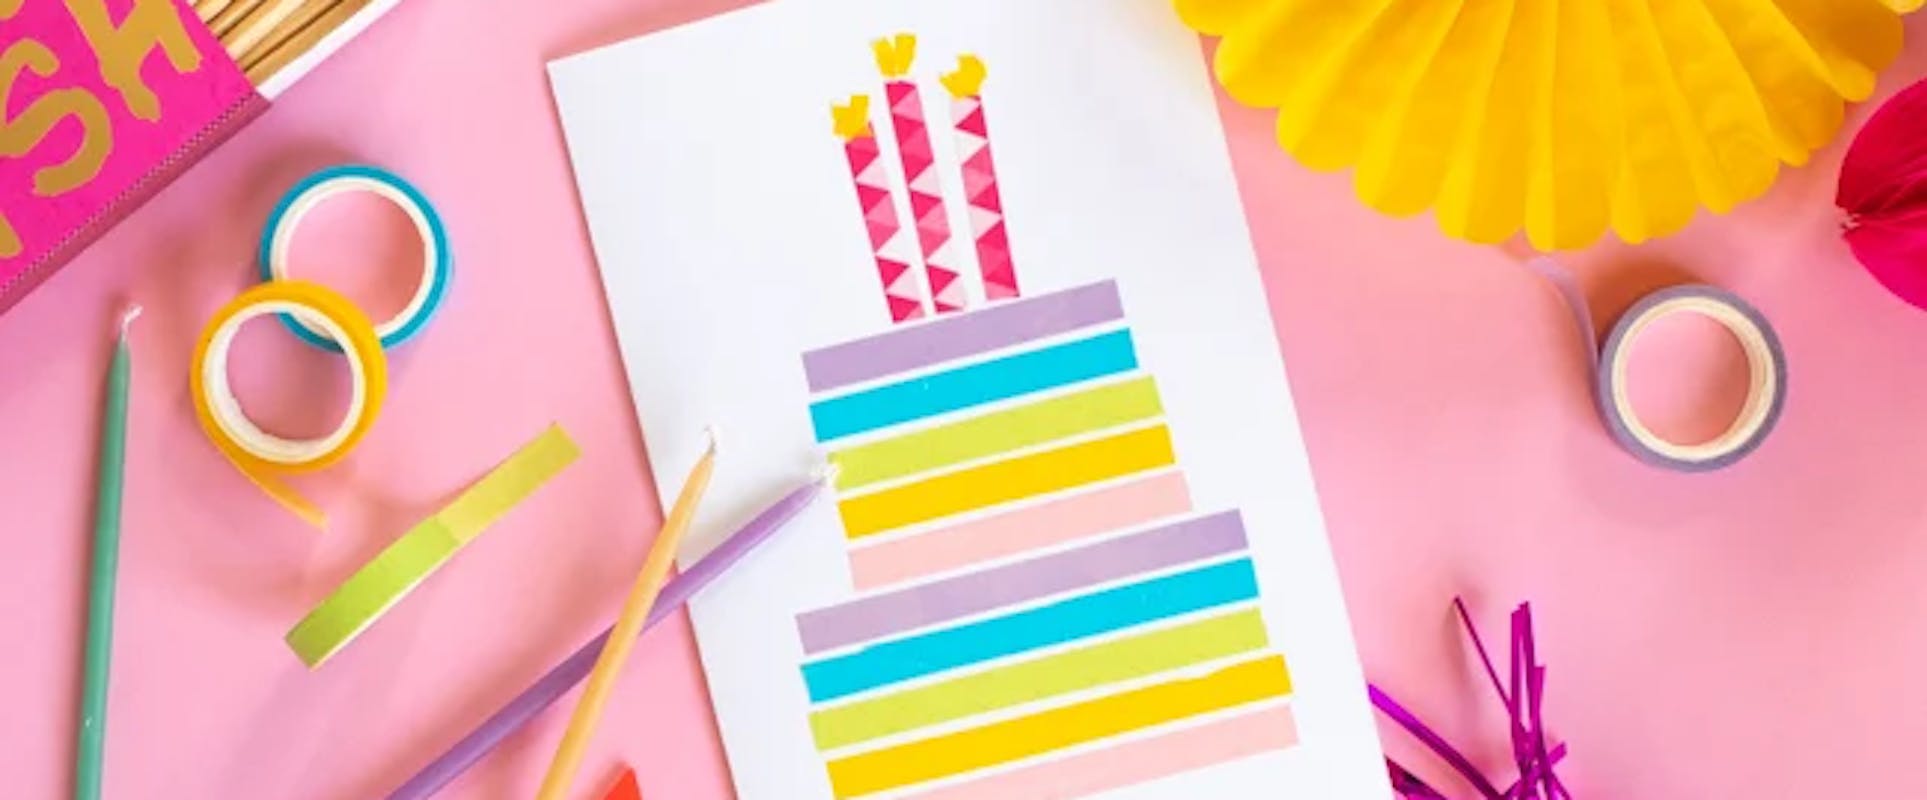 How to DIY an adorable album to save special greeting cards!